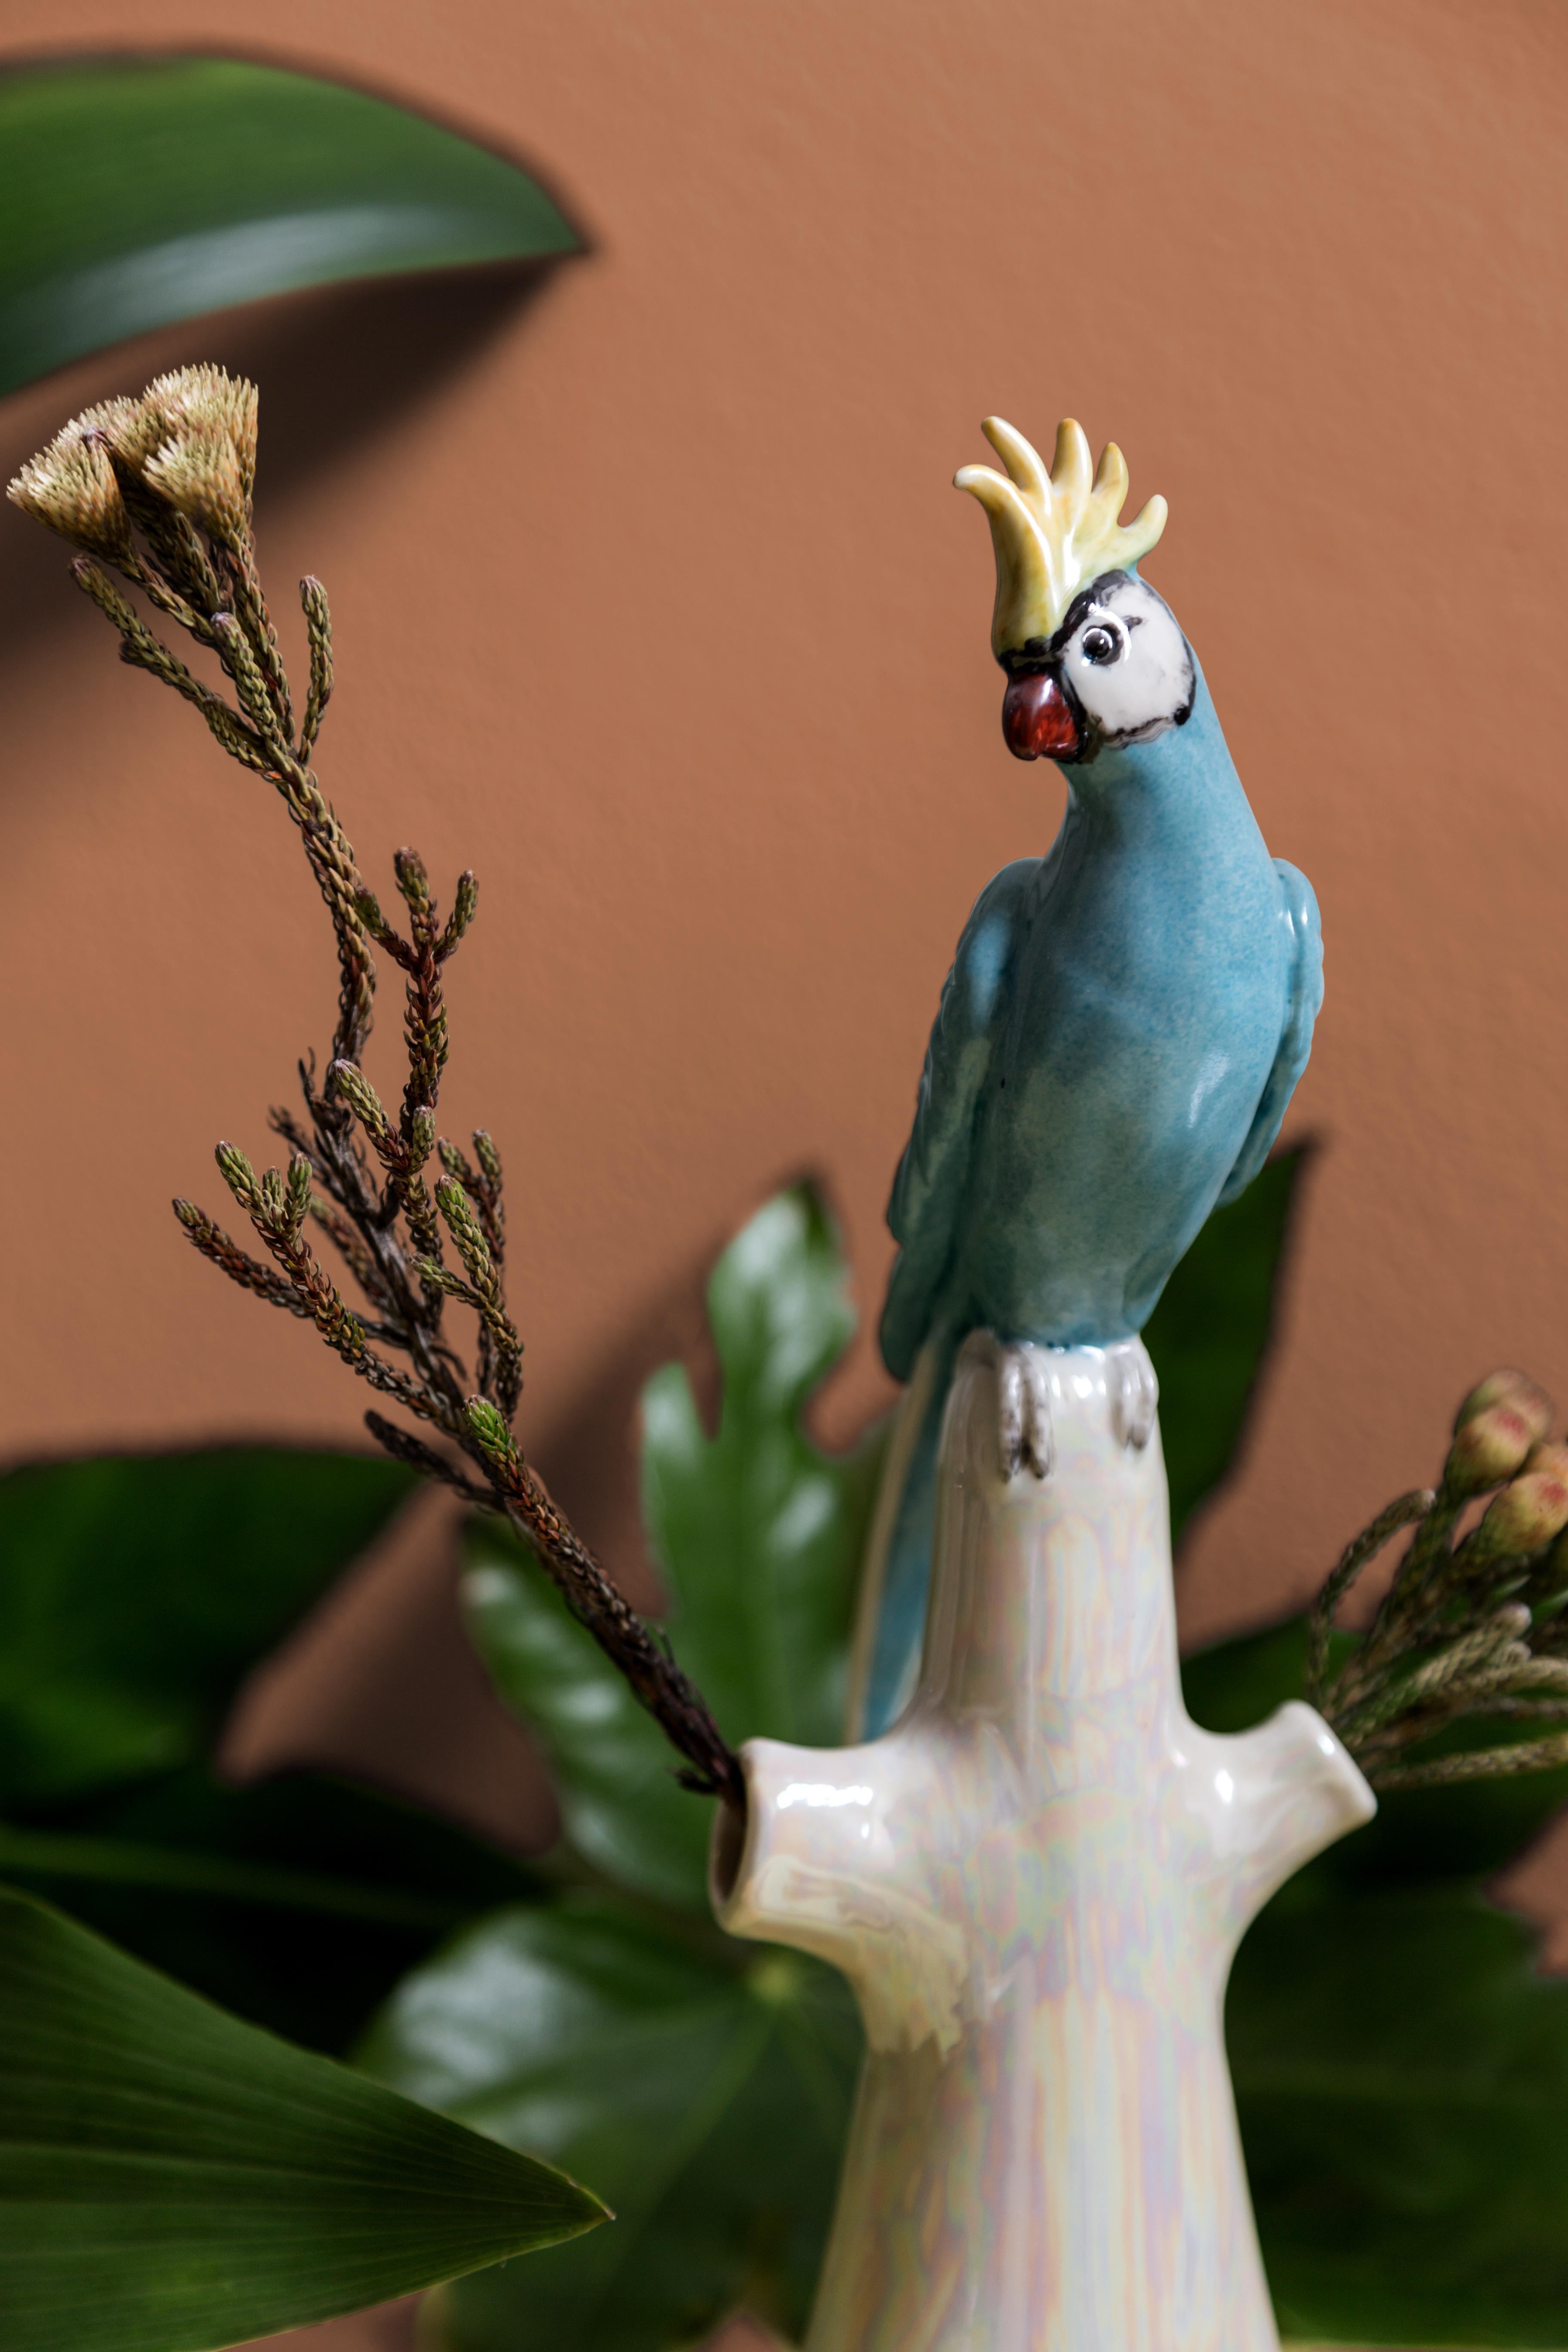 This Italian porcelain sculpture is part of Grand Tour by Vito Nesta. Made in Capodimonte porcelain with a glossy and iridescent finish. This flower holder is embellished by a hand painted parrot.